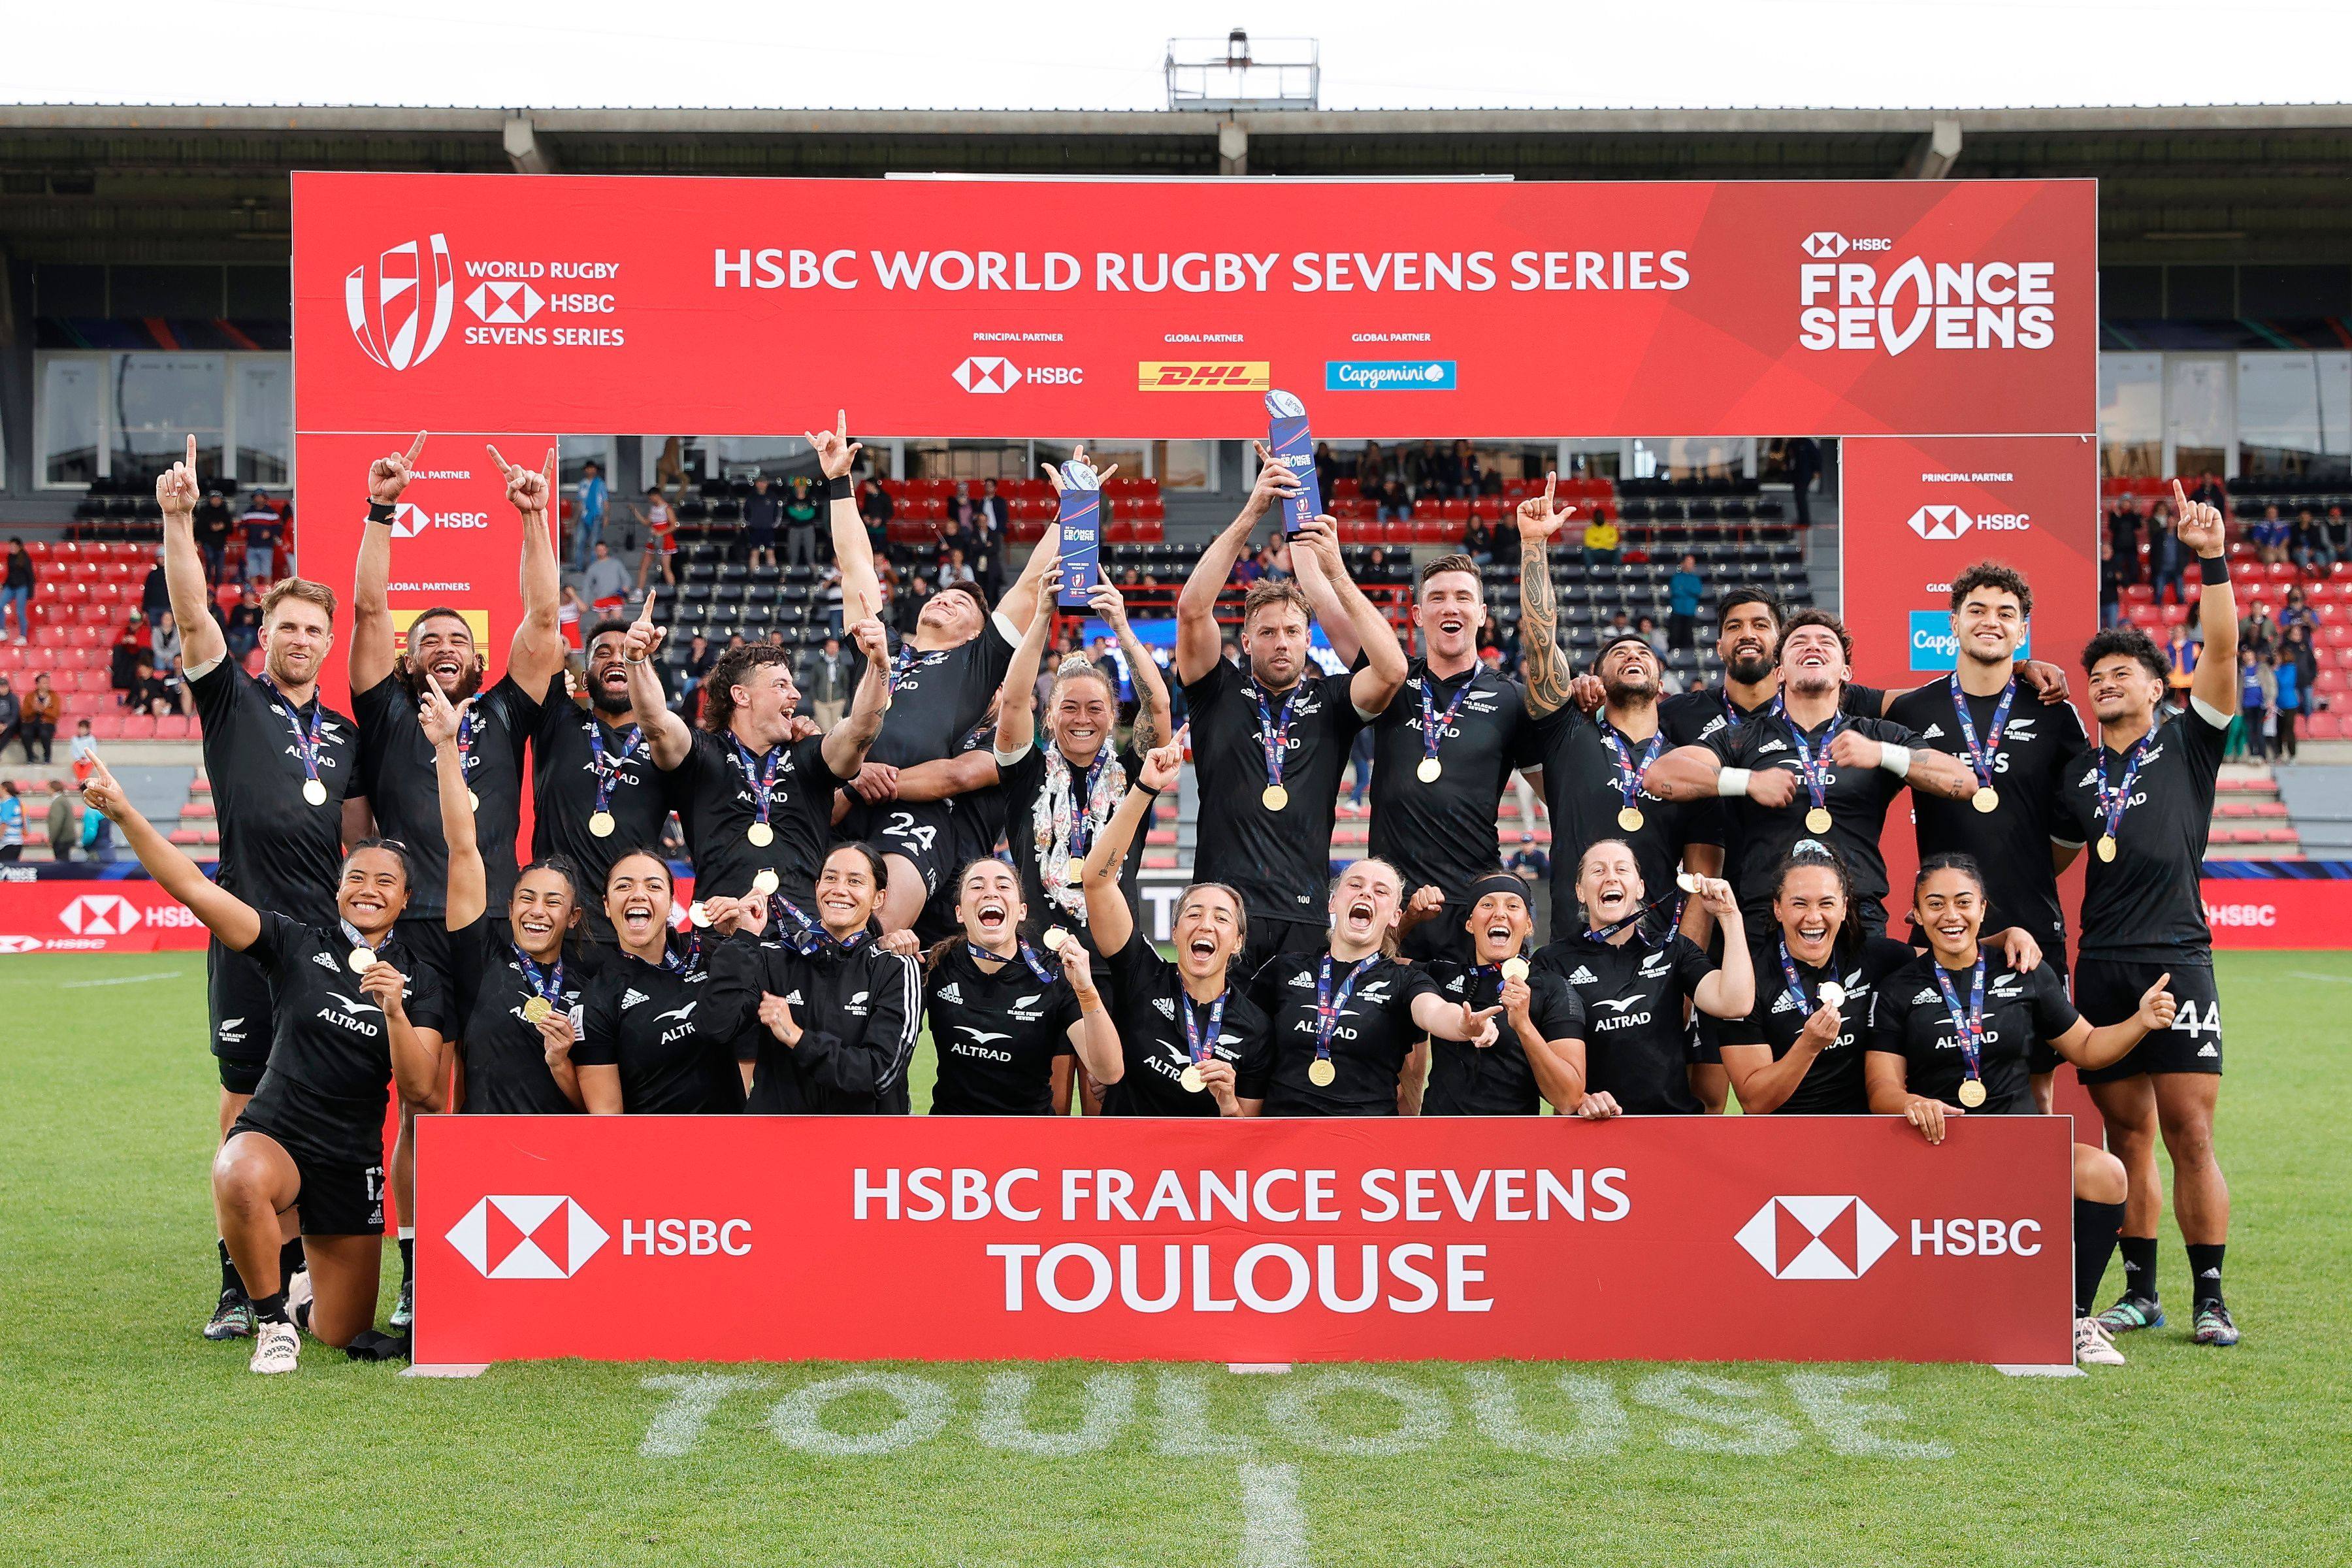 New Zealand’s men and women celebrate their victories at the HSBC France Sevens. Photo: World Rugby